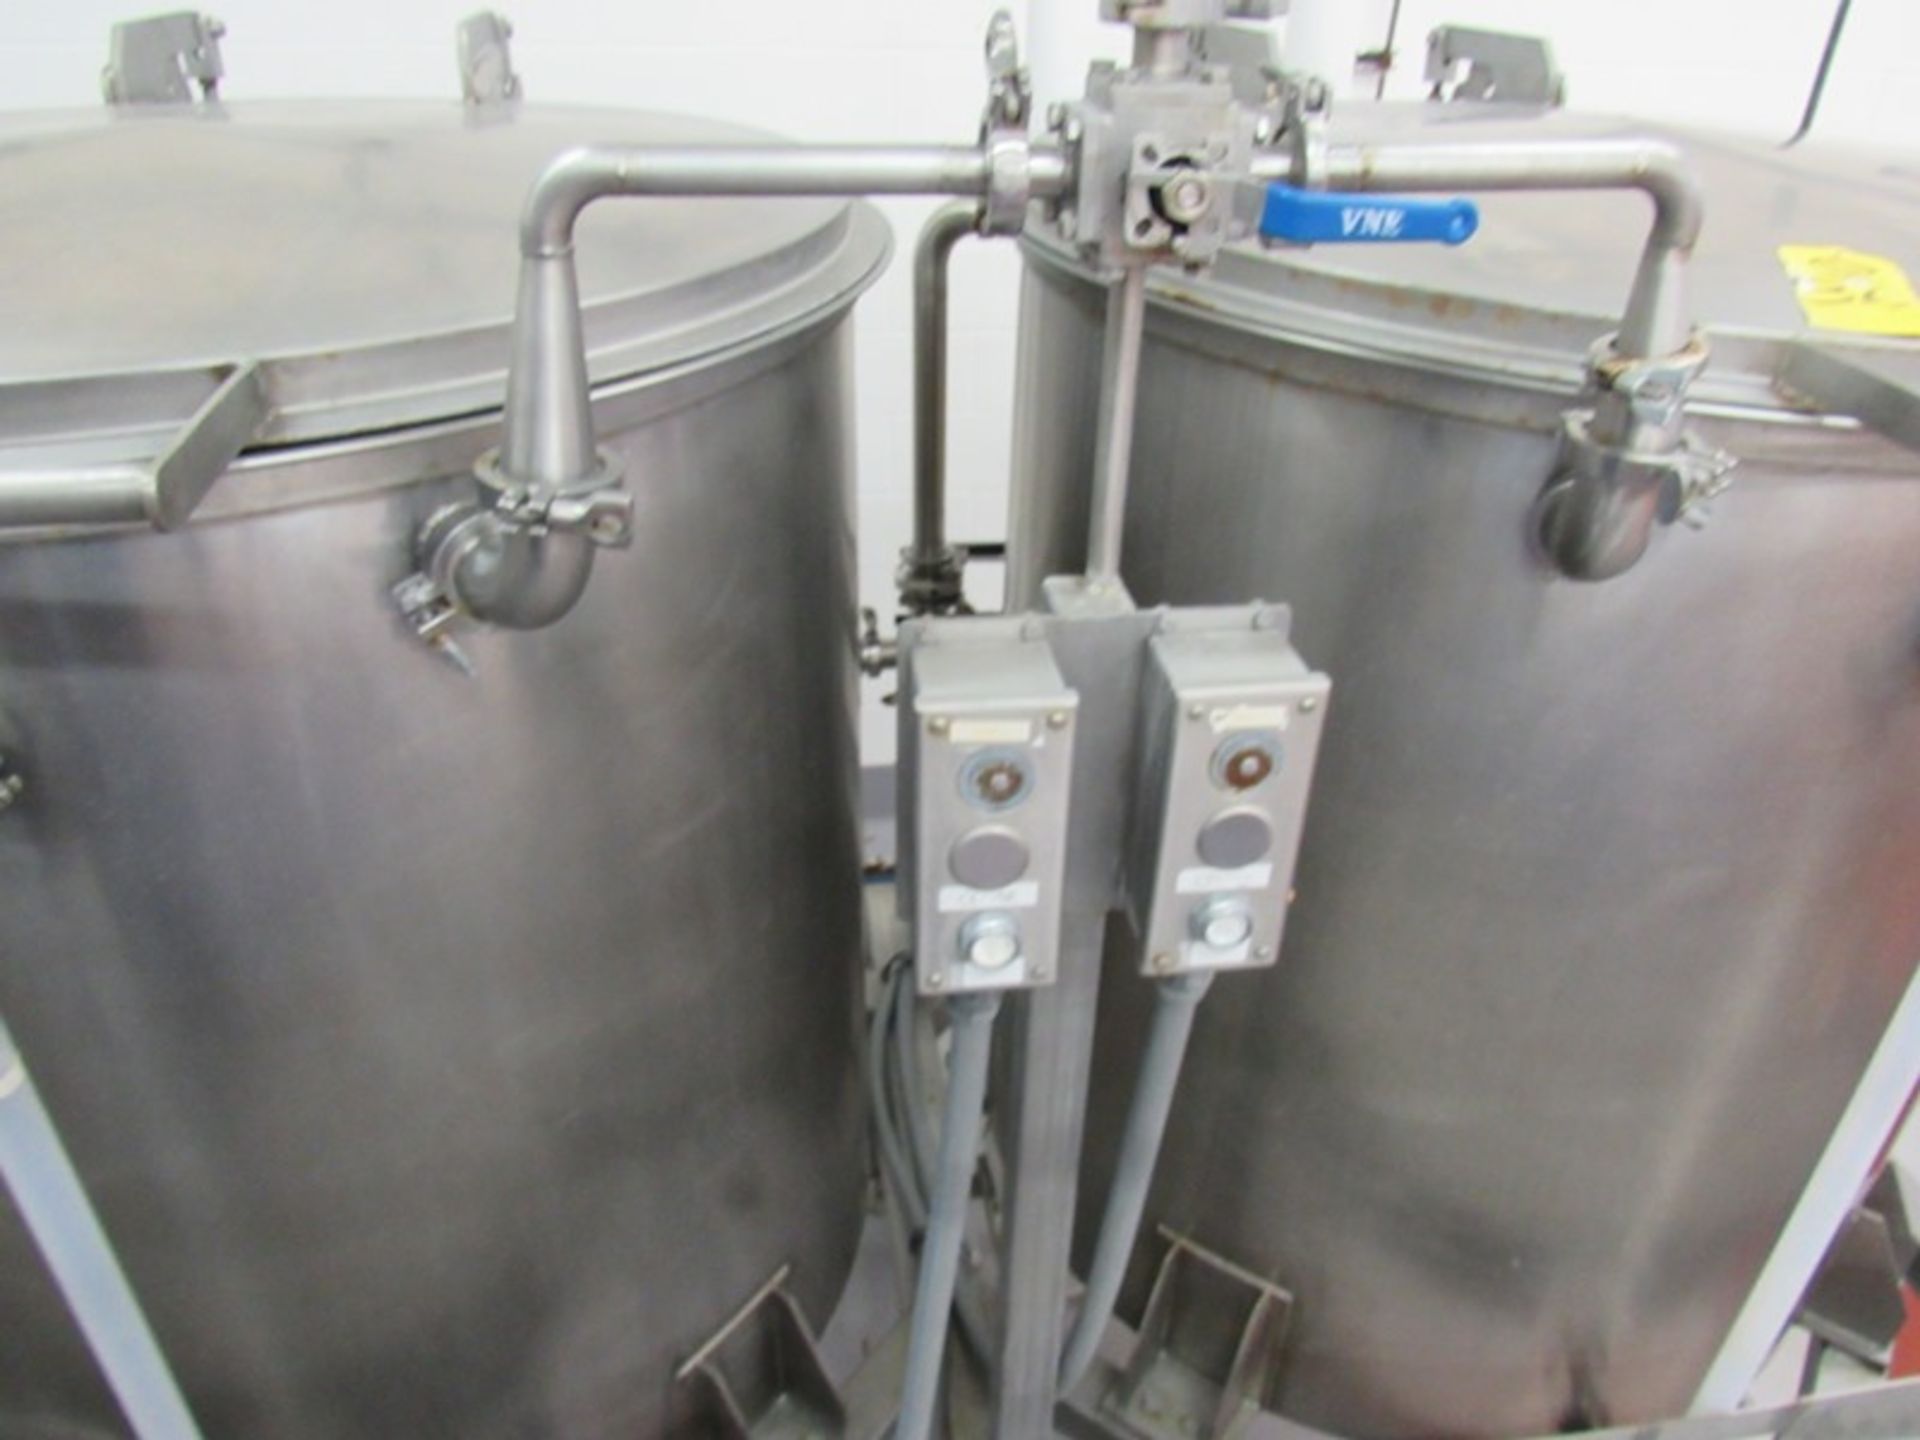 Dual Stainless Steel Mix Tank System Tanks, 46" Dia. X 43" Deep on stainless steel stand, - Image 10 of 10